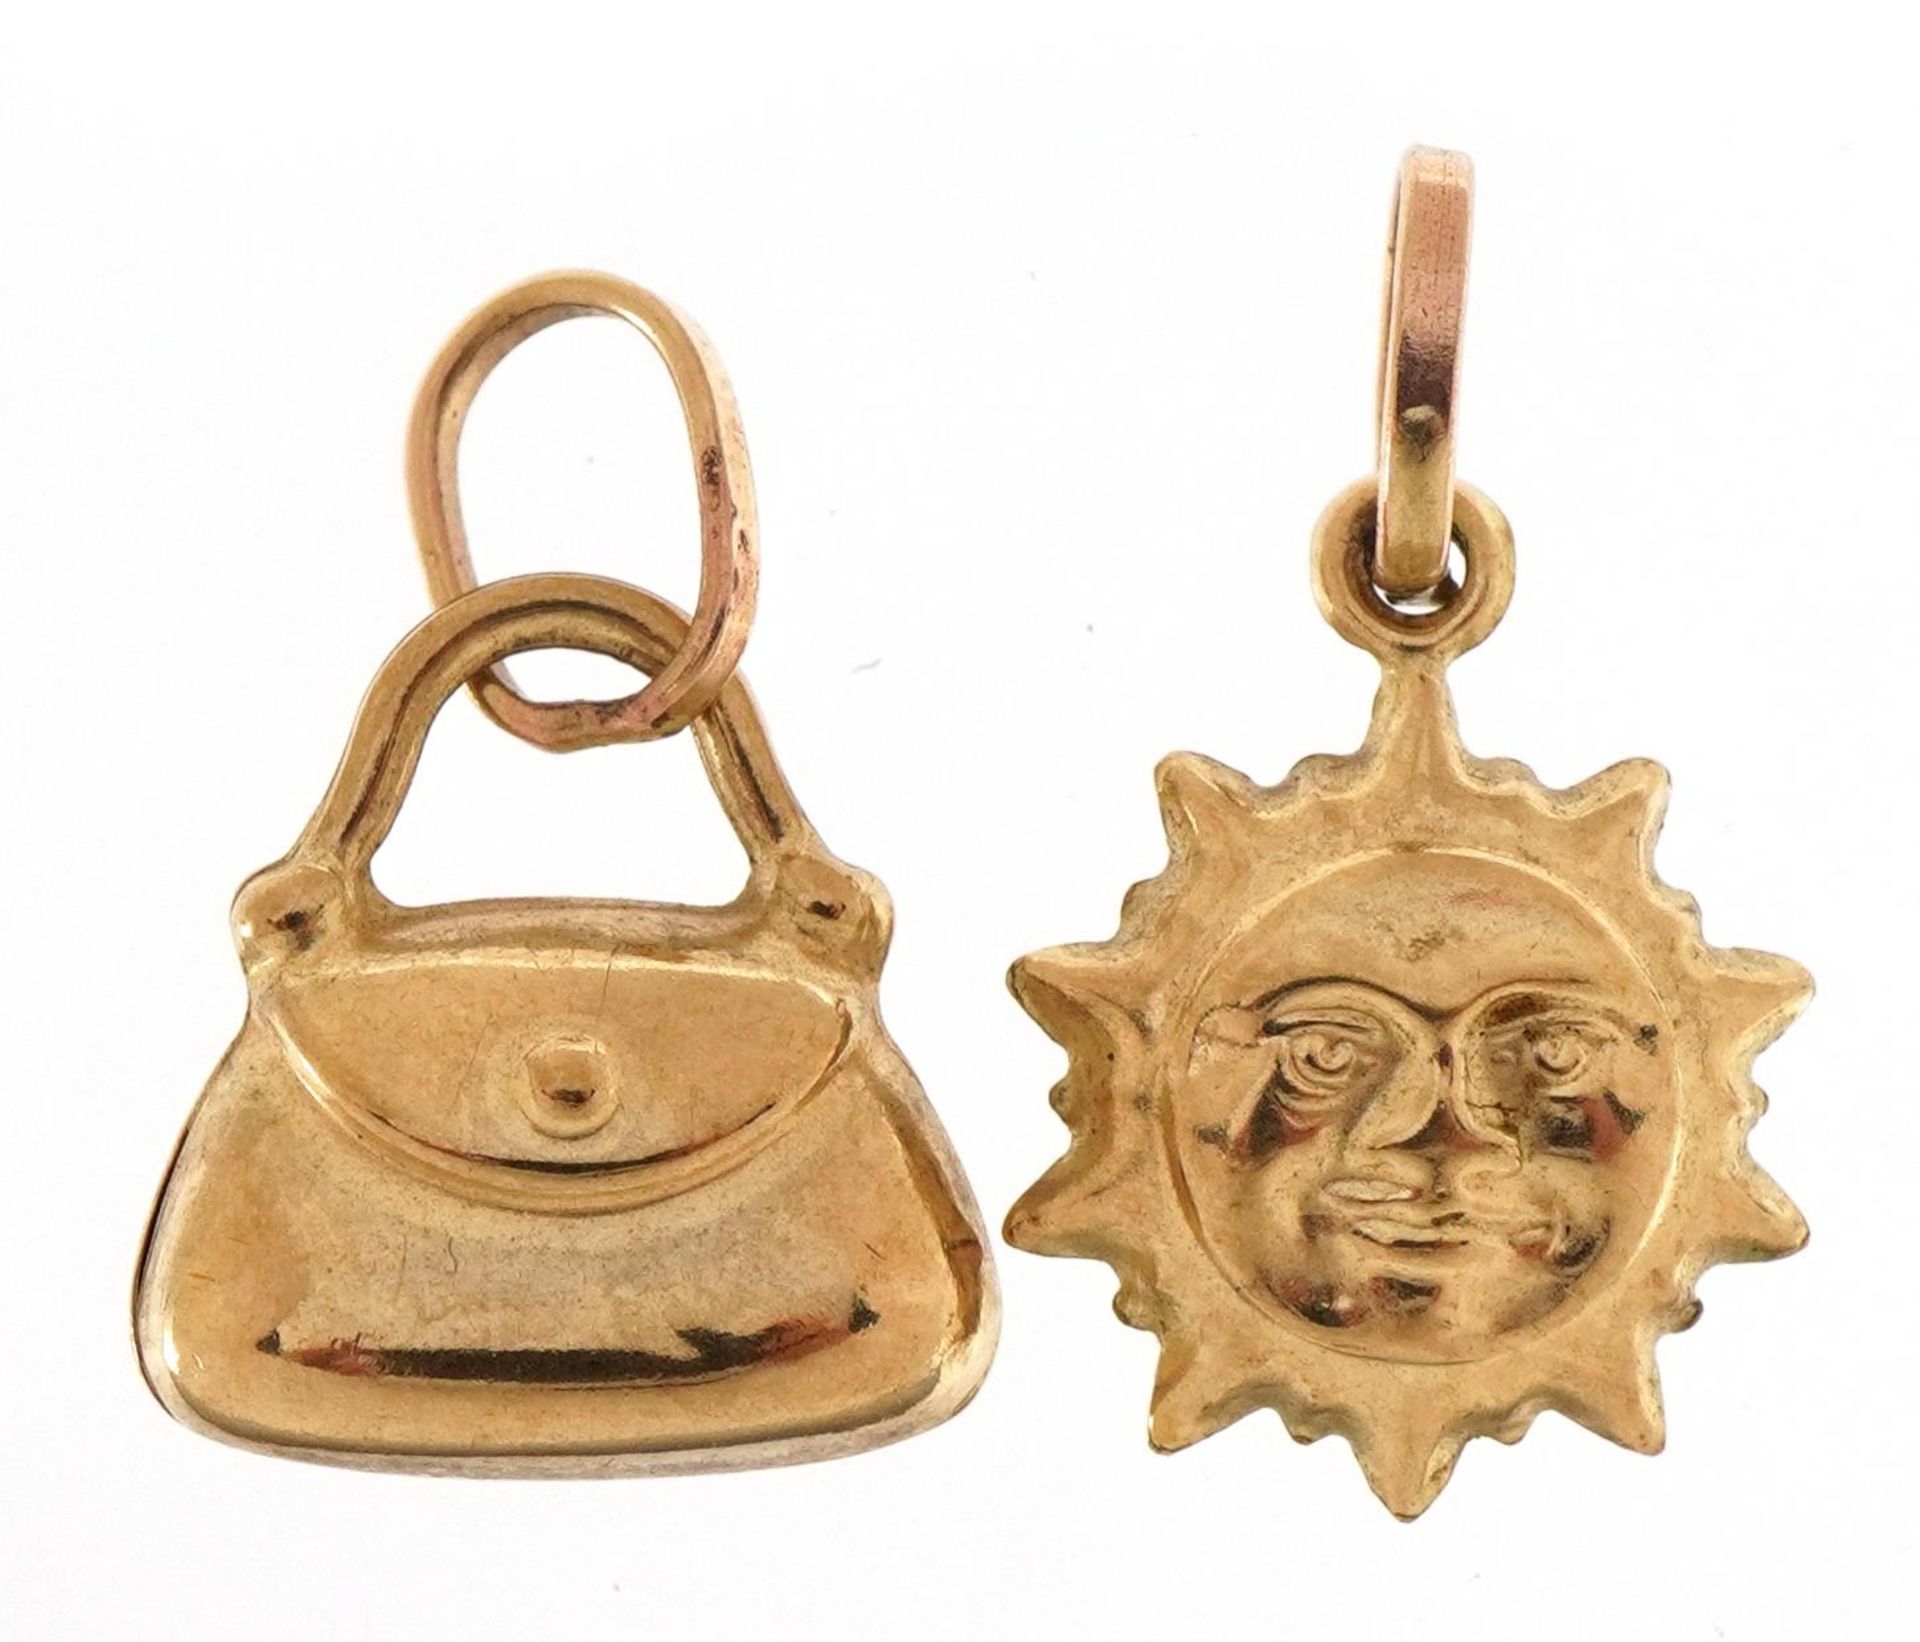 Two 9ct gold charms comprising handbag and sun, the largest 1.4cm high, 1.2g